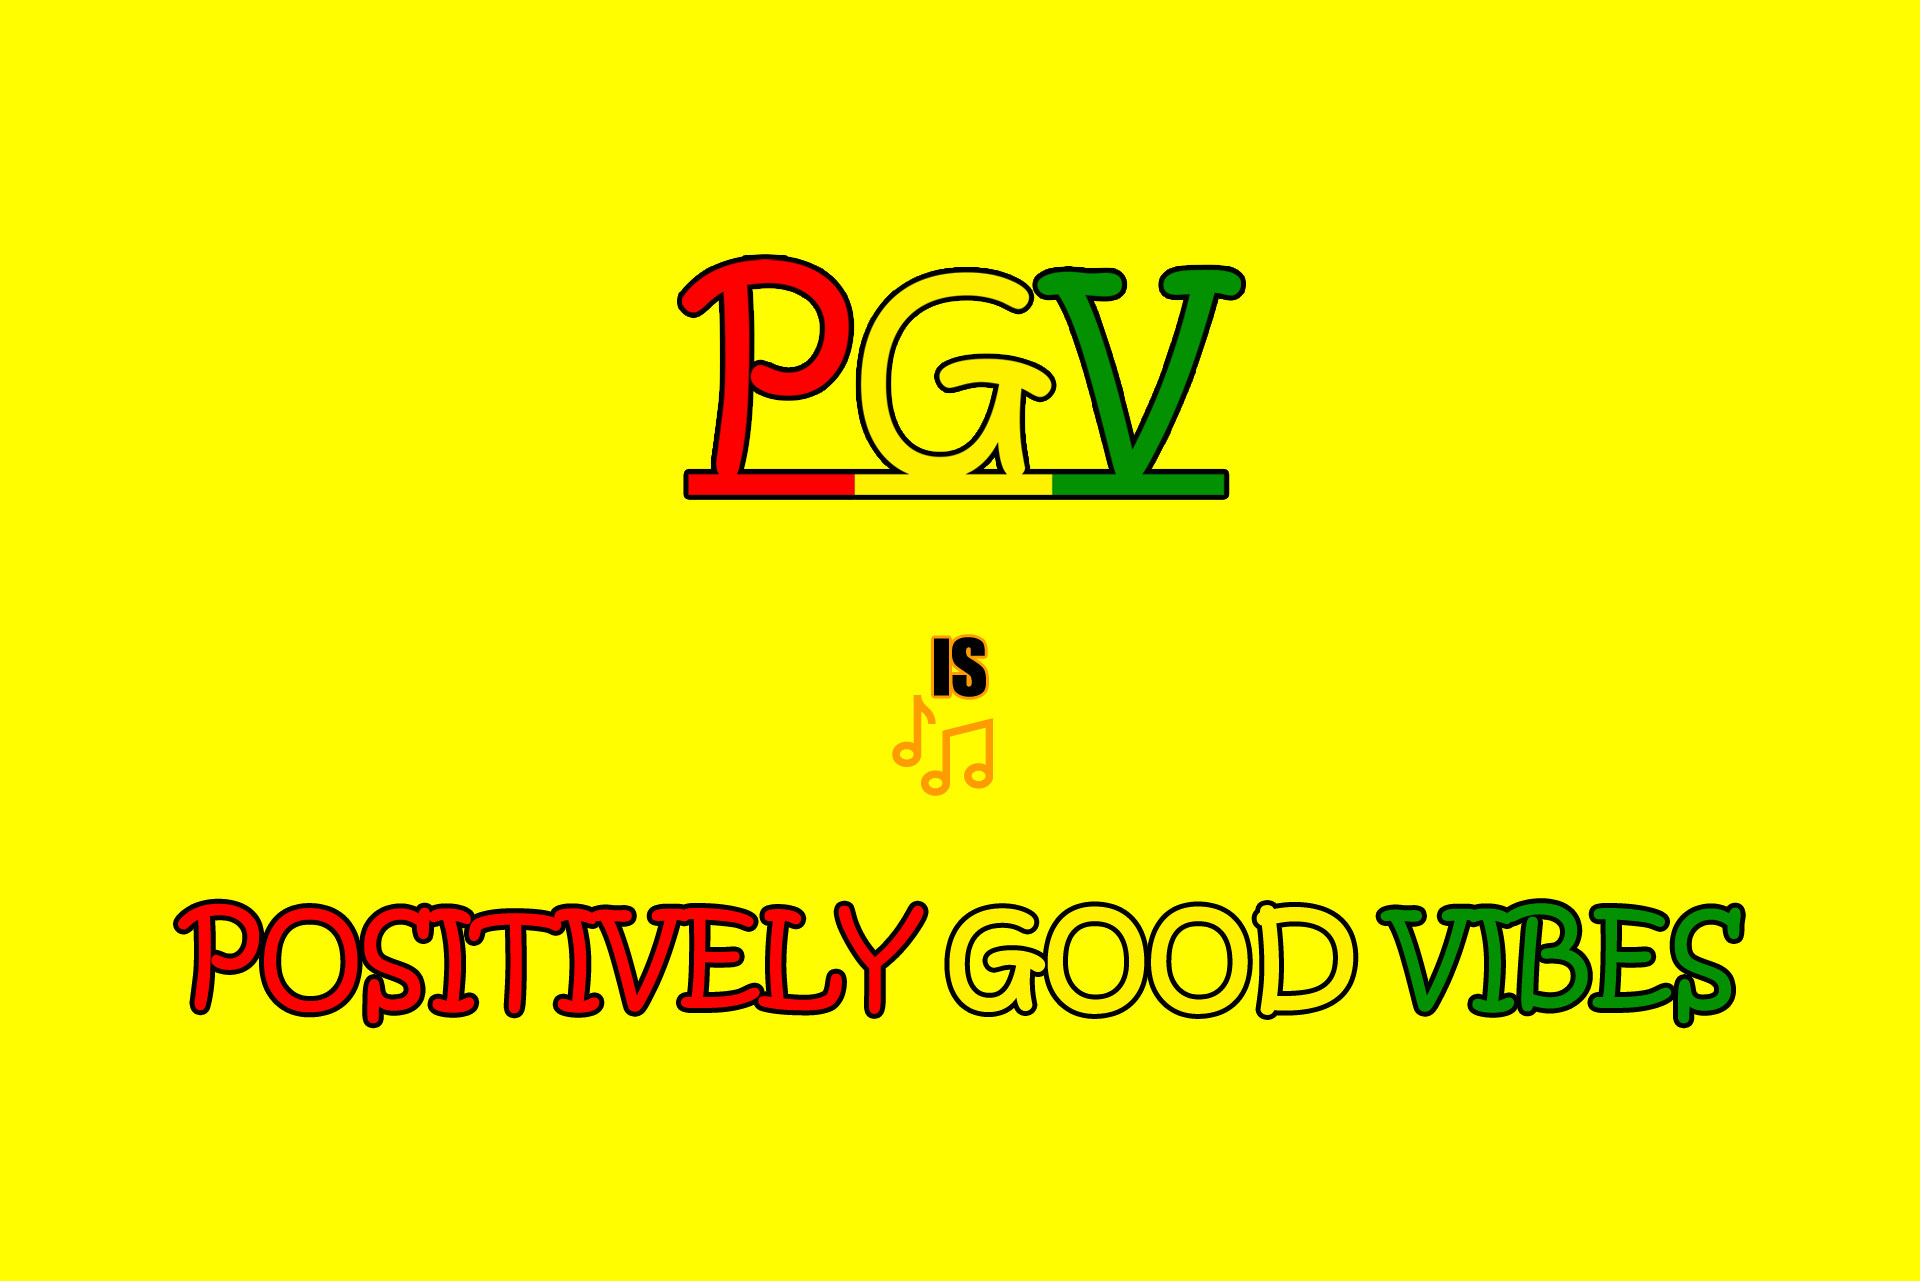 PGV is Positively Good Vibes